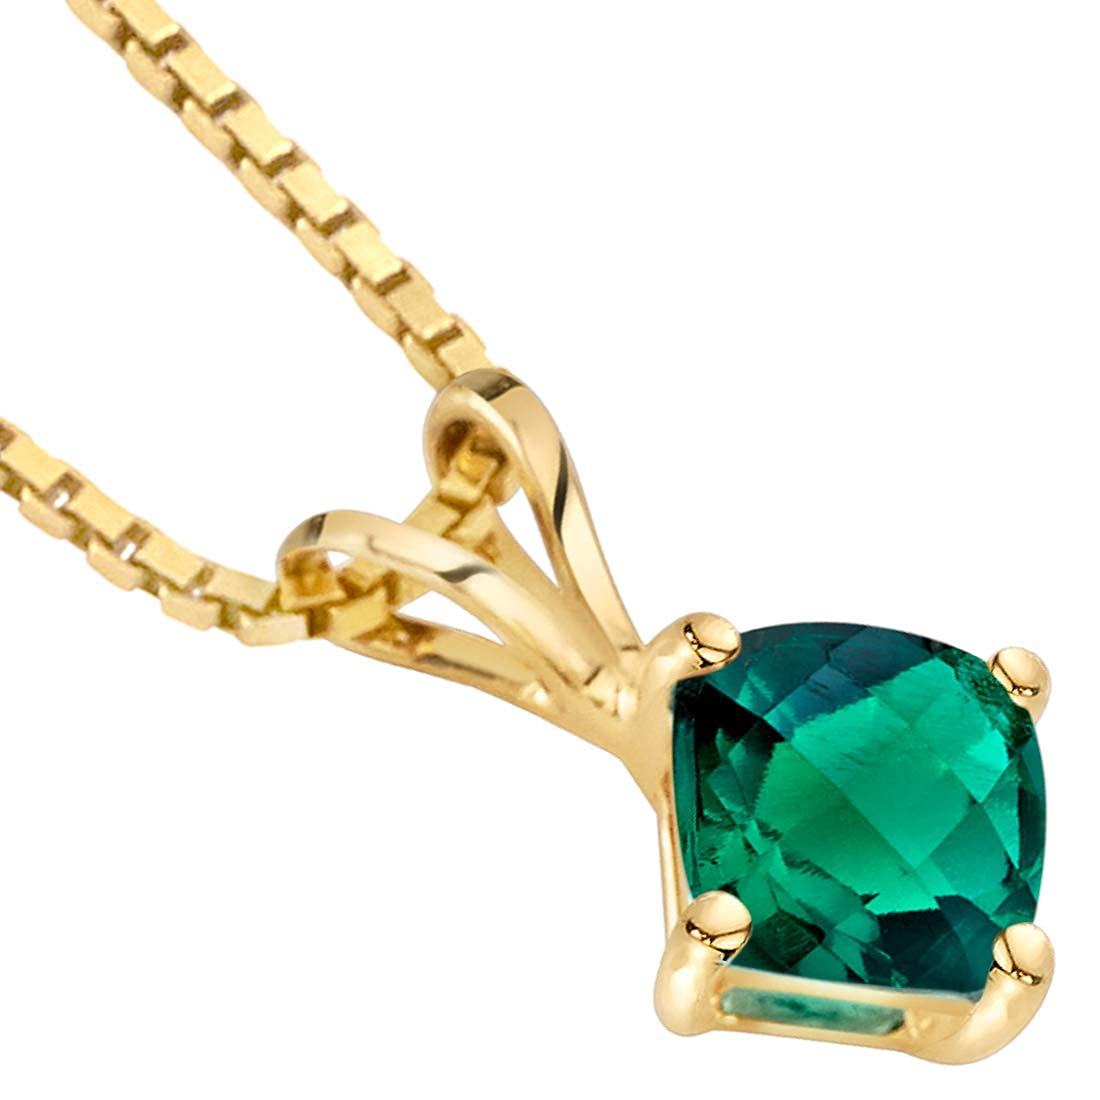 Peora Created Emerald Pendant for Women 14K Yellow Gold, Classic Solitaire, 0.75 Carat, Cushion Cut, 6mm, AAA Grade